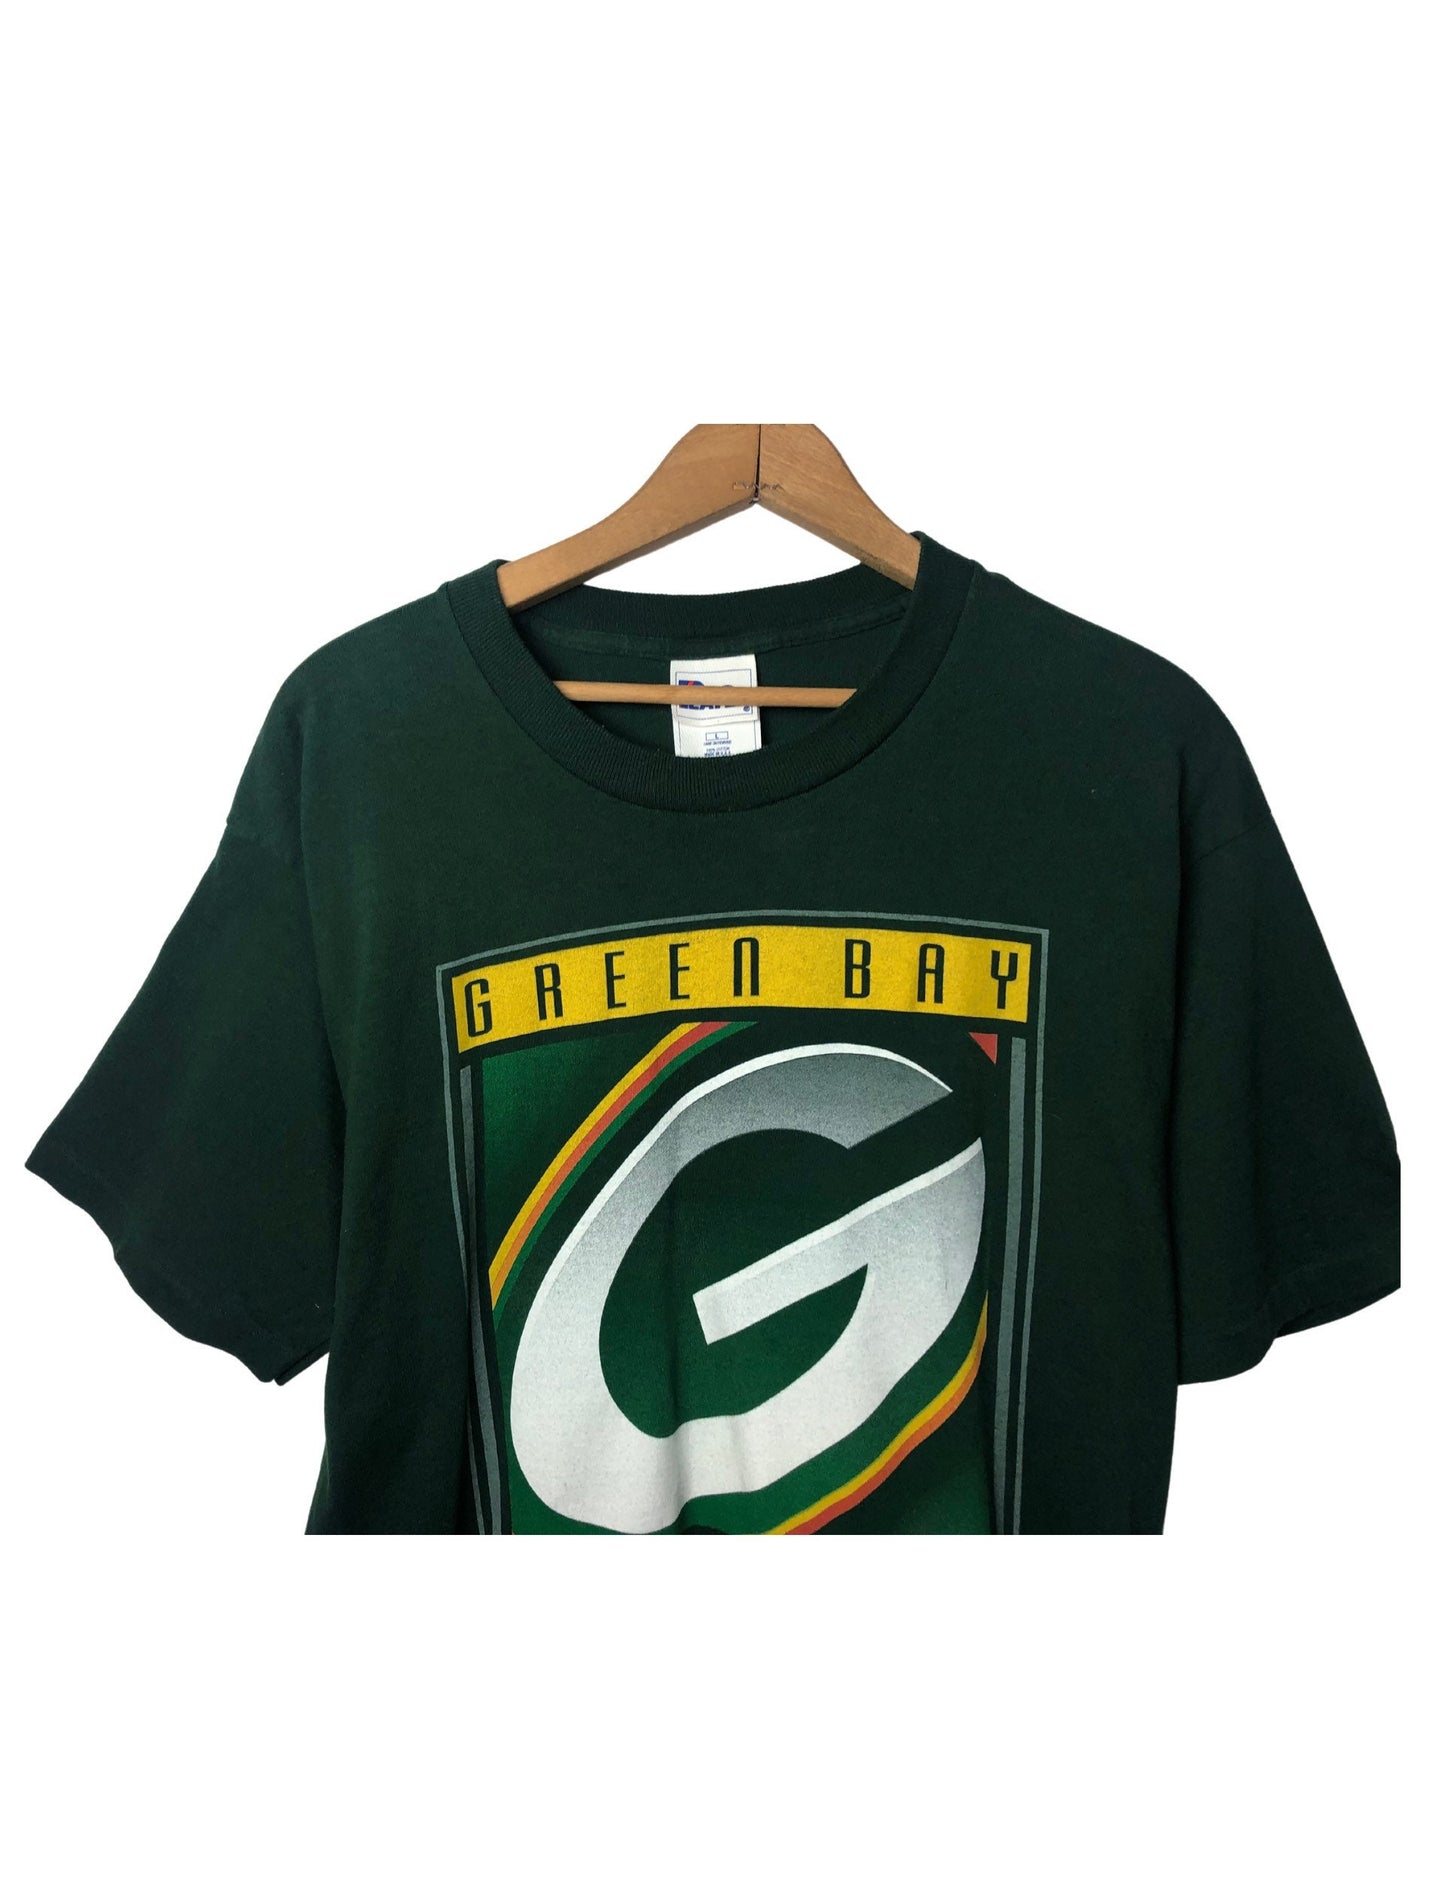 Vintage 90’s Green Bay Packers Pro Player Football 100% Cotton T-Shirt Size Large